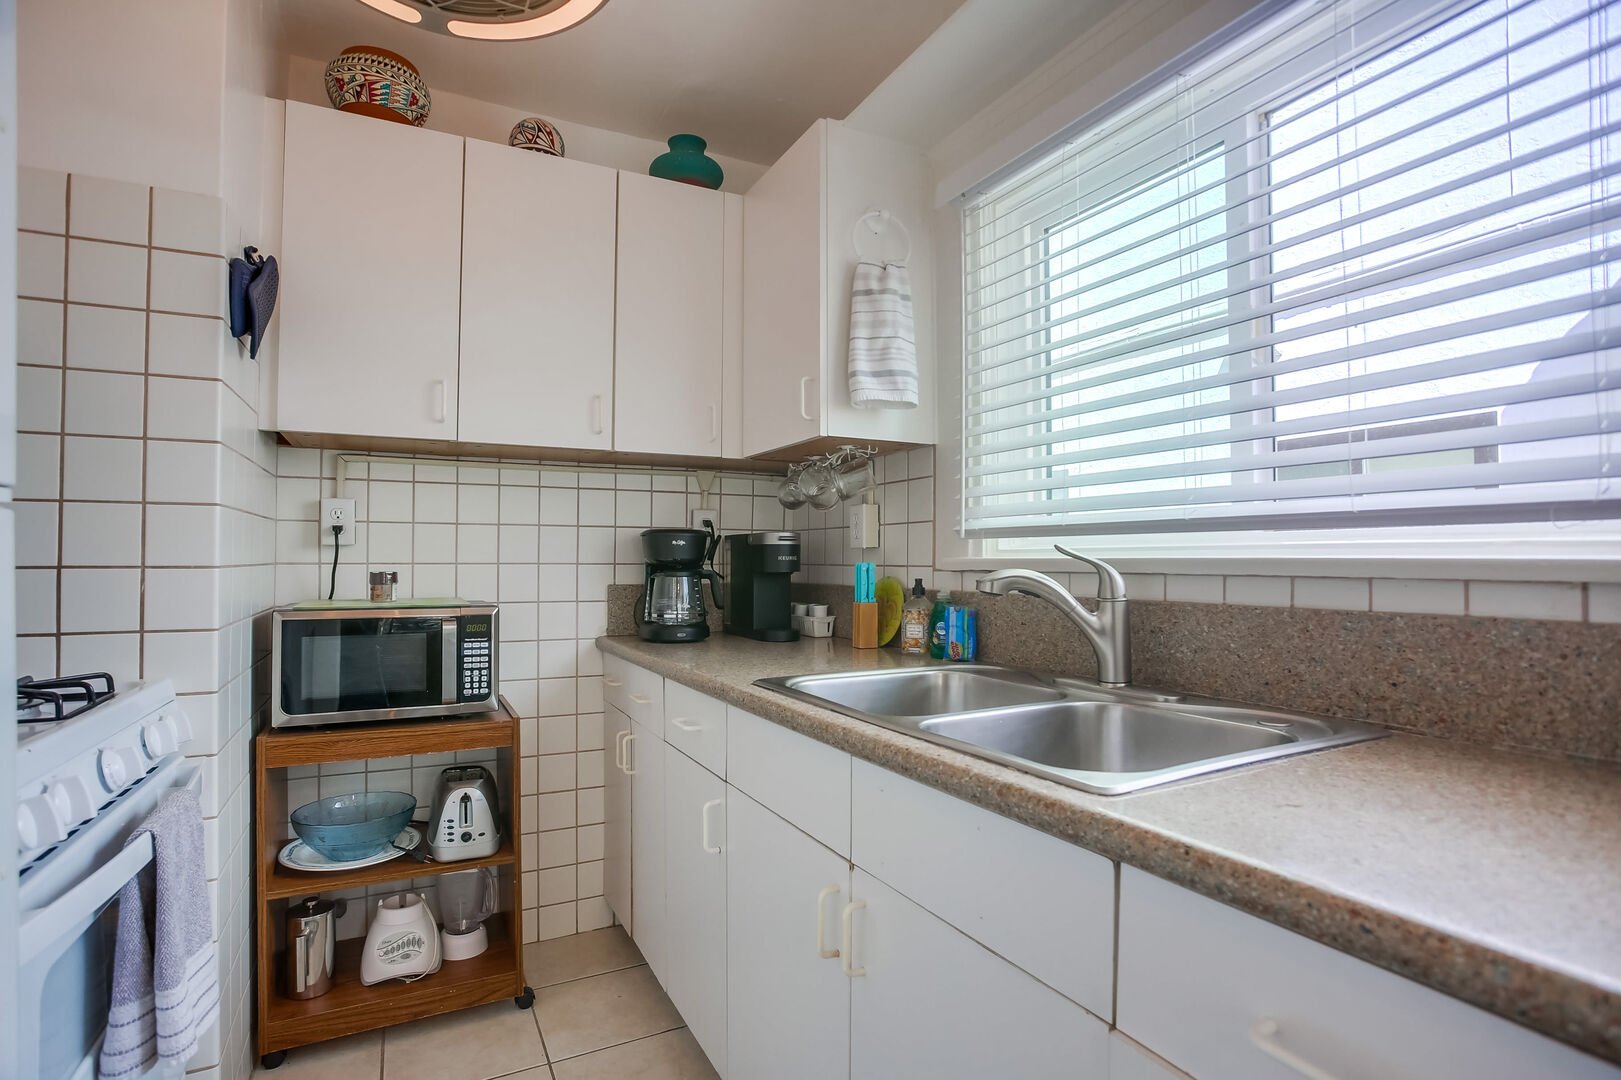 Fully equipped kitchen with microwave, stove, oven, refrigerator, freezer, coffee maker, cookware and bakeware. Please note: there is no dishwasher